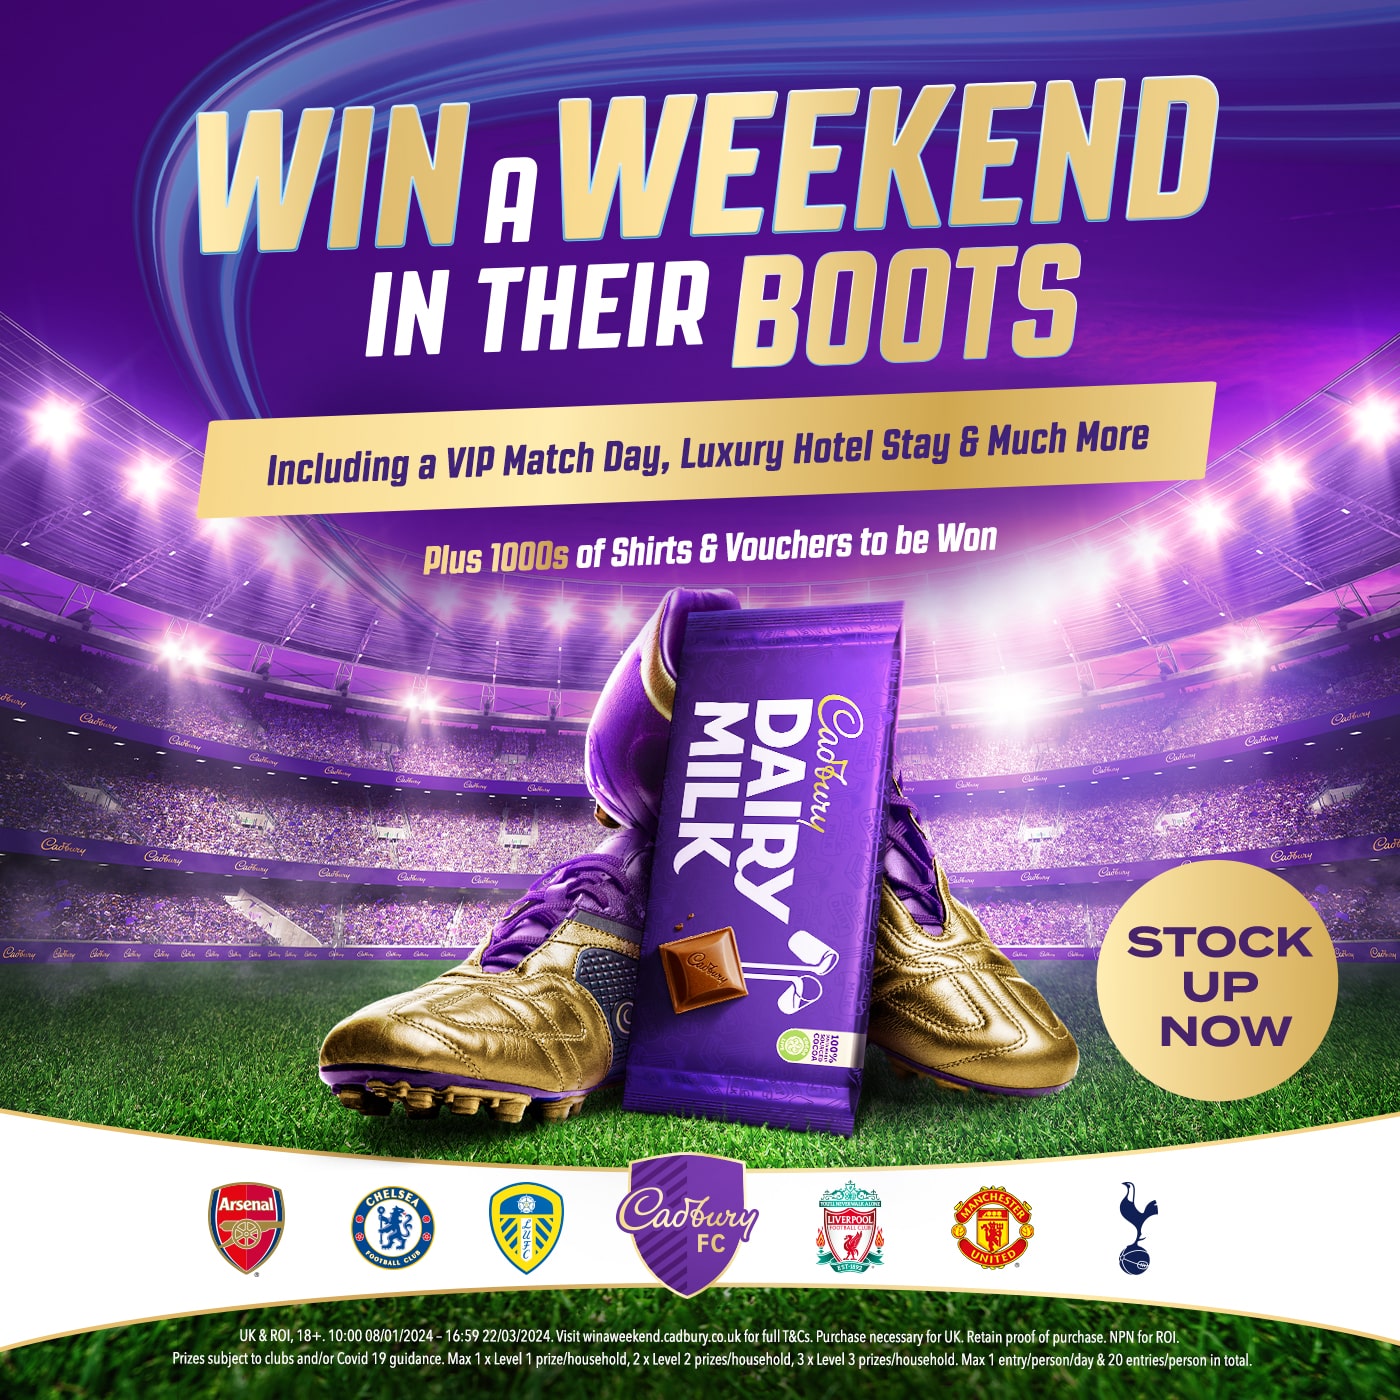 Win a WEEKEND in their Boots!